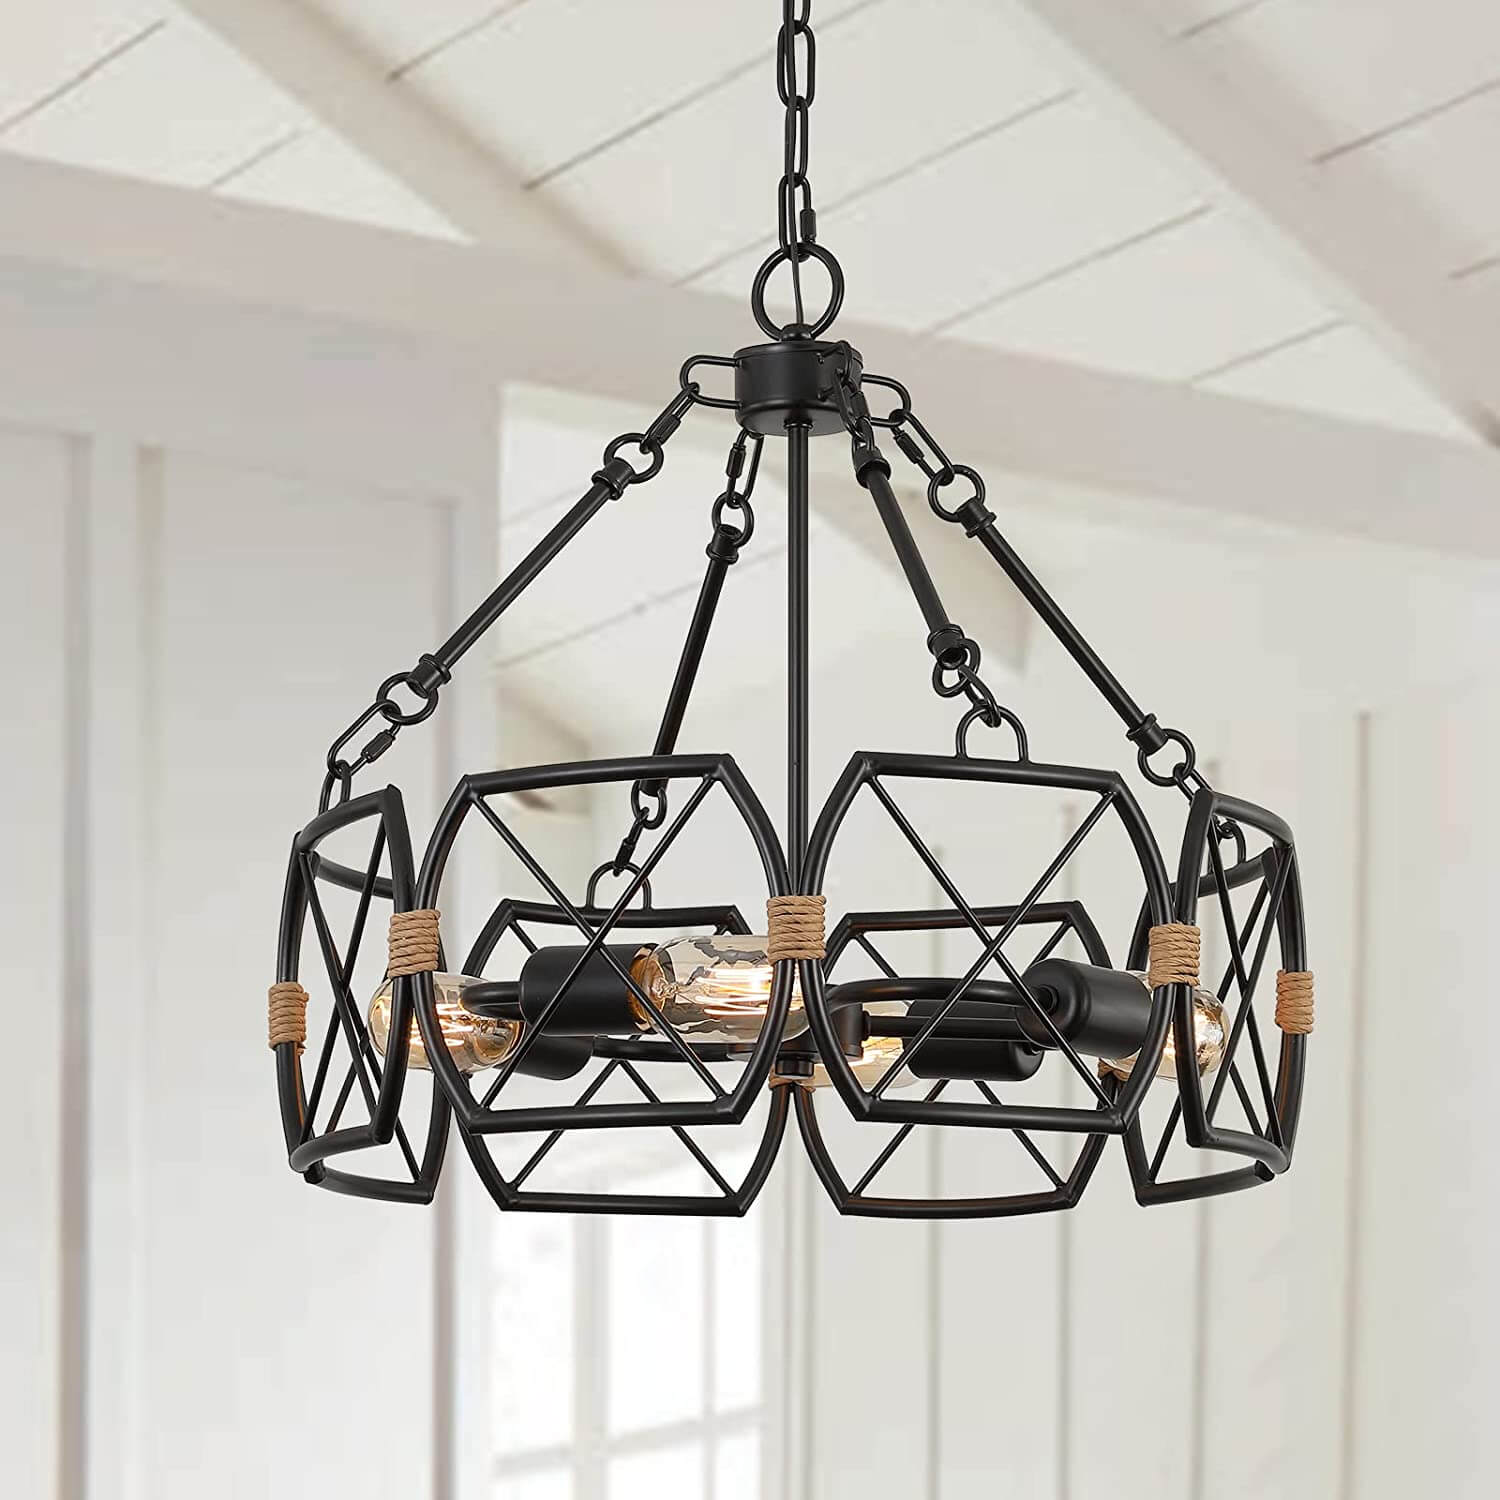 wowow 4 light rustic industrial hanging lights for high ceilings